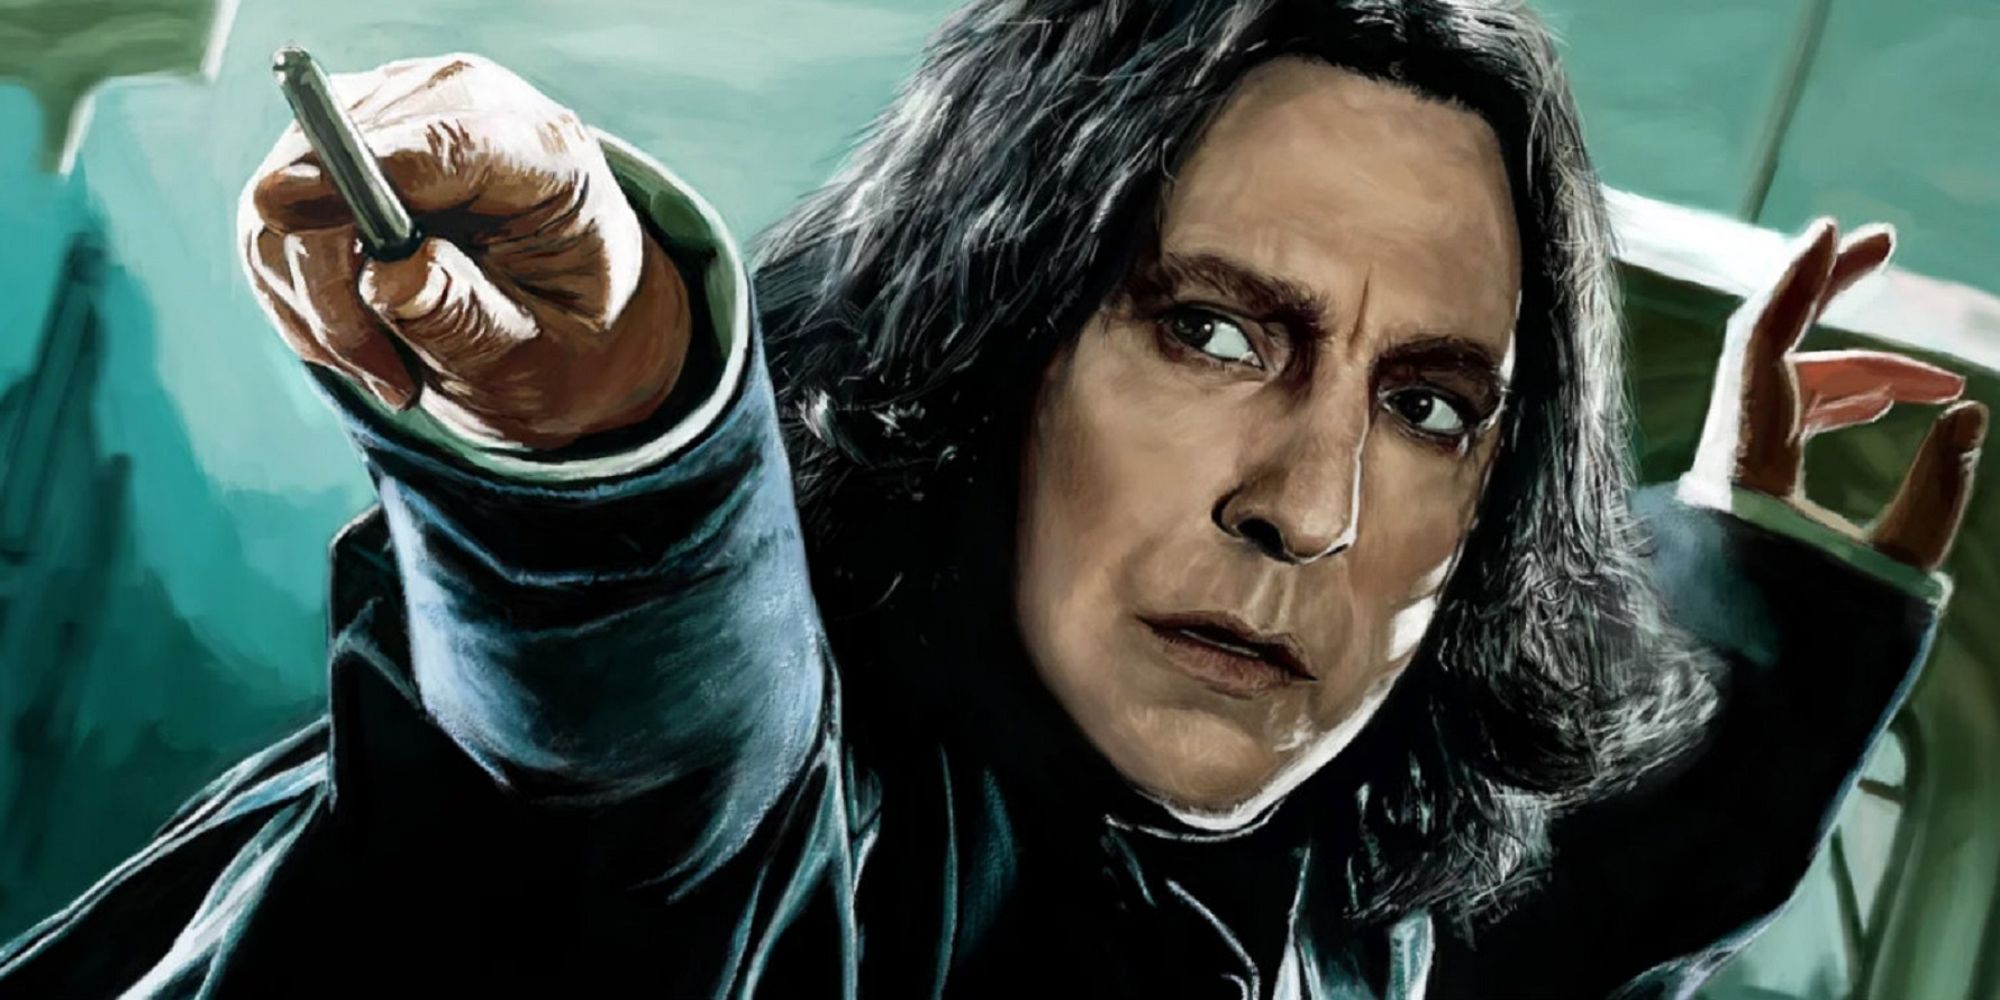 Severus Snape casting a spell in a Harry Potter promotional image.